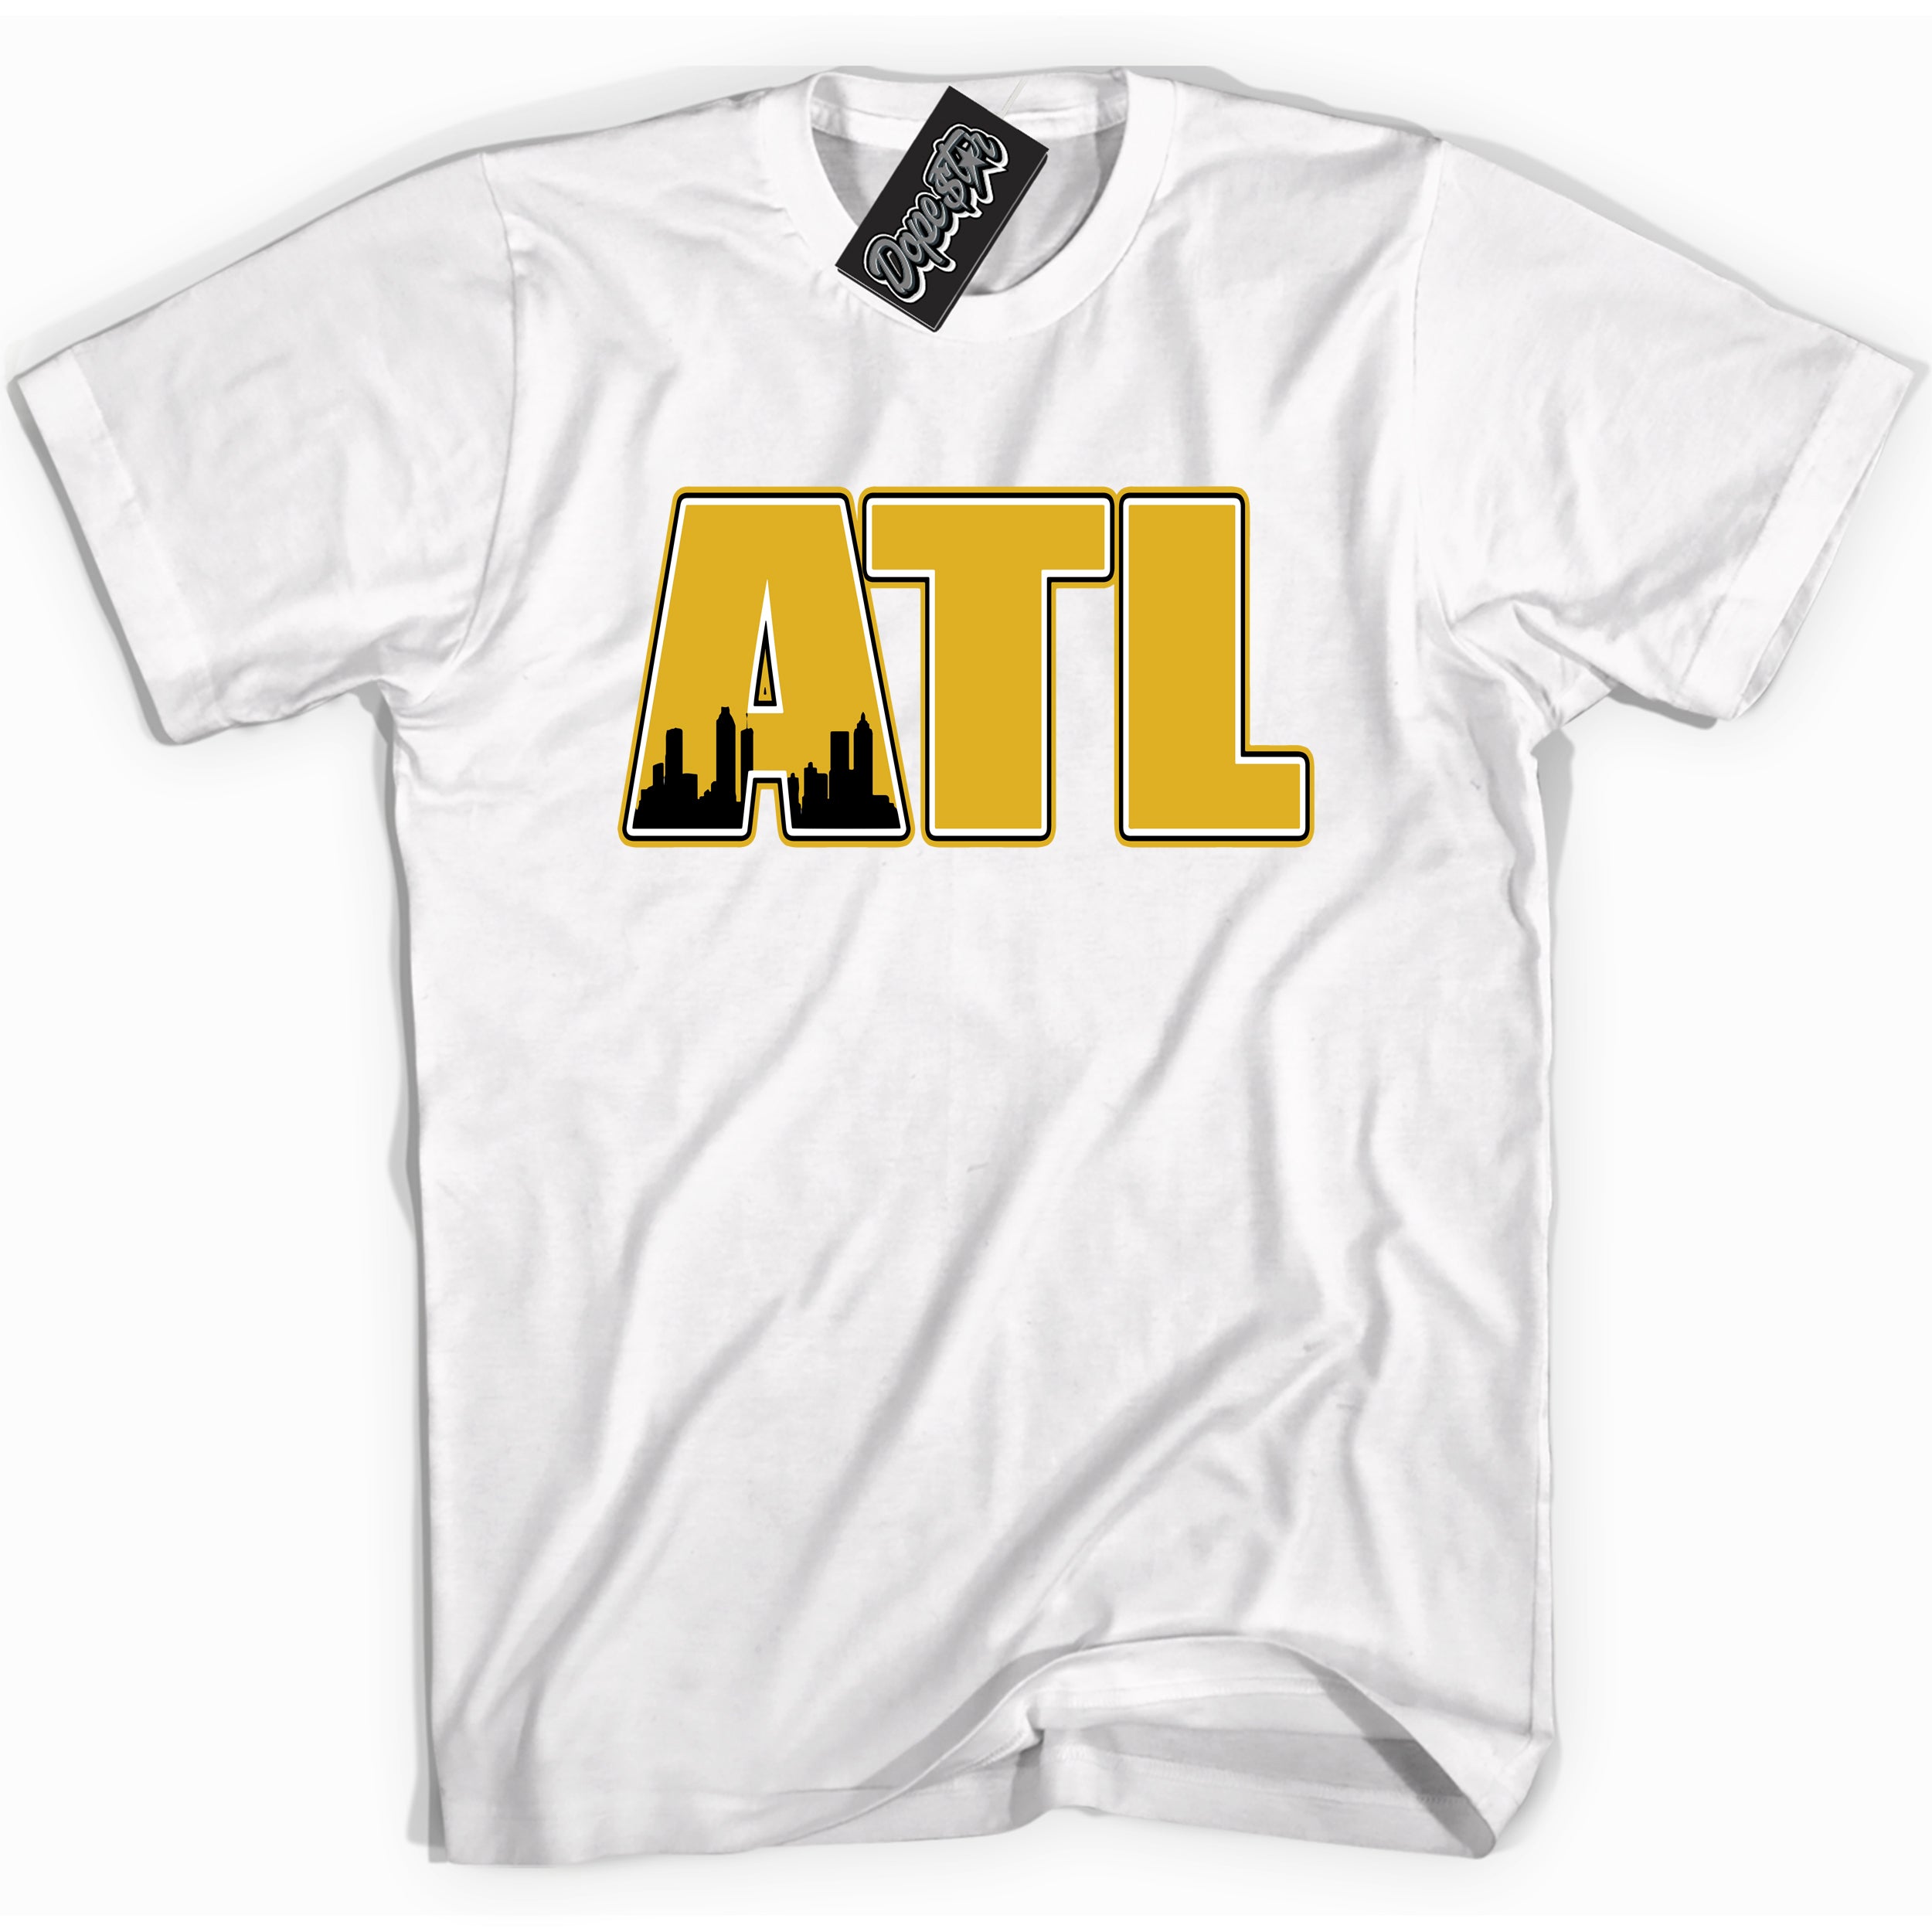 Cool White Shirt with “ Atlanta” design that perfectly matches Yellow Ochre 6s Sneakers.